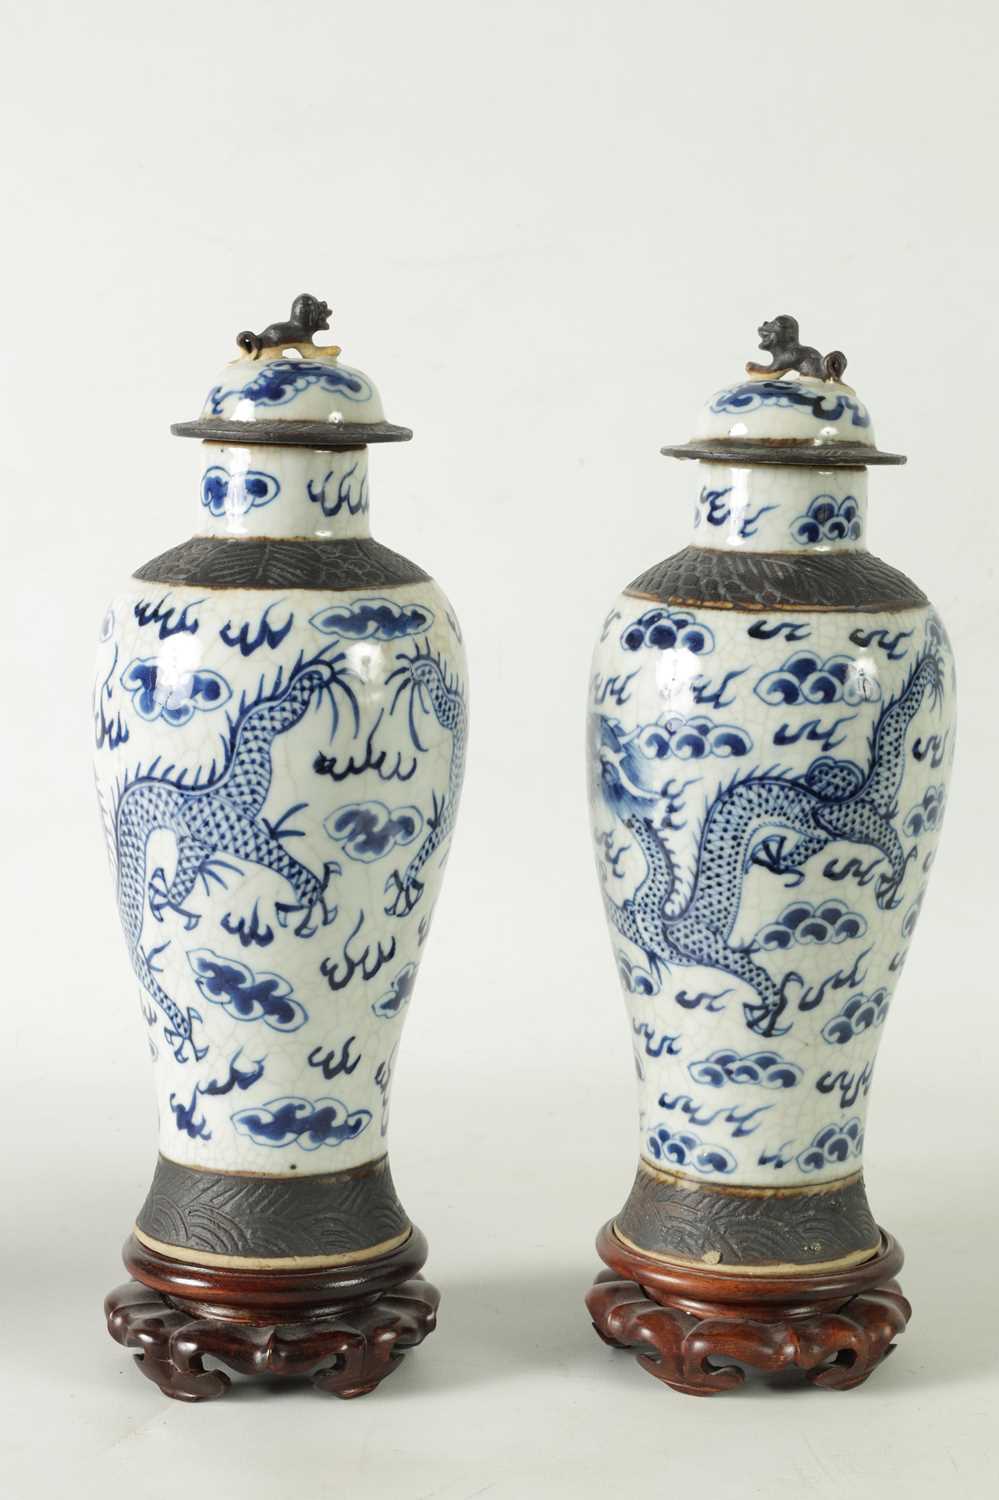 A PAIR OF 19TH CENTURY CHINESE CRACKLE GLAZE LIDDED VASES - Image 2 of 11